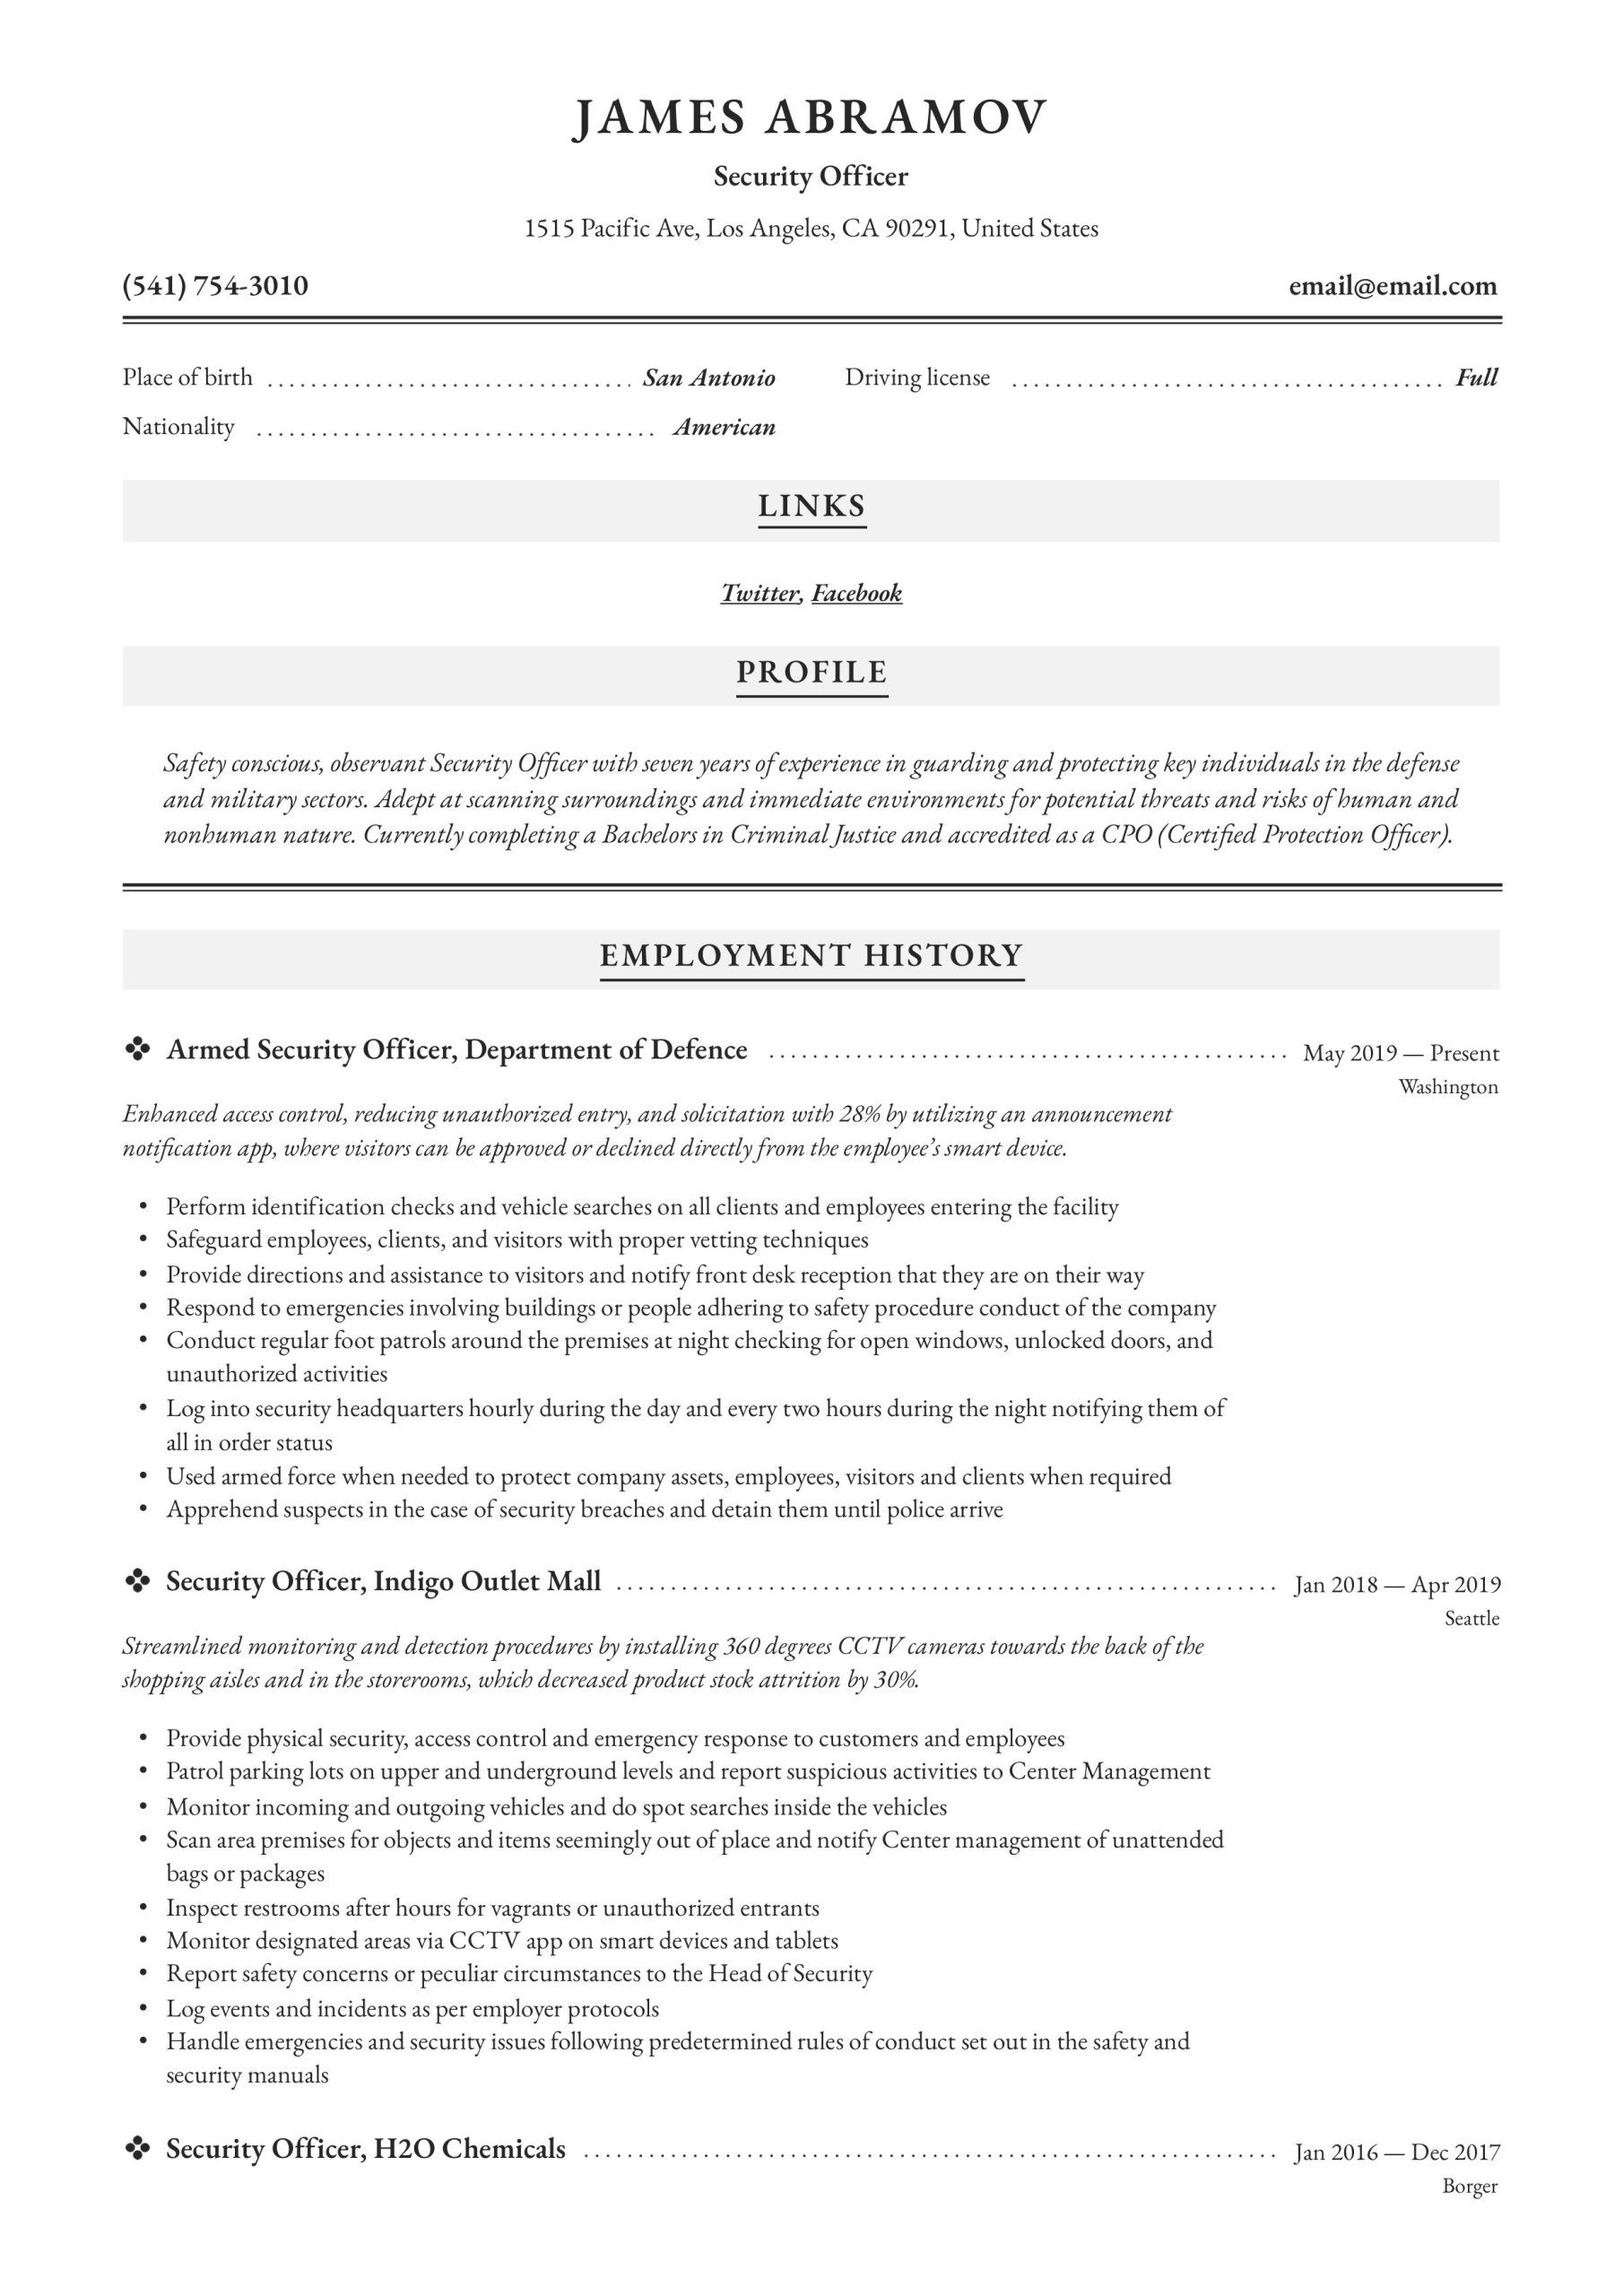 Sample Resumes for Nuclear Security Guards Security Officer Resume & Writing Guide  12 Resume Examples 2020